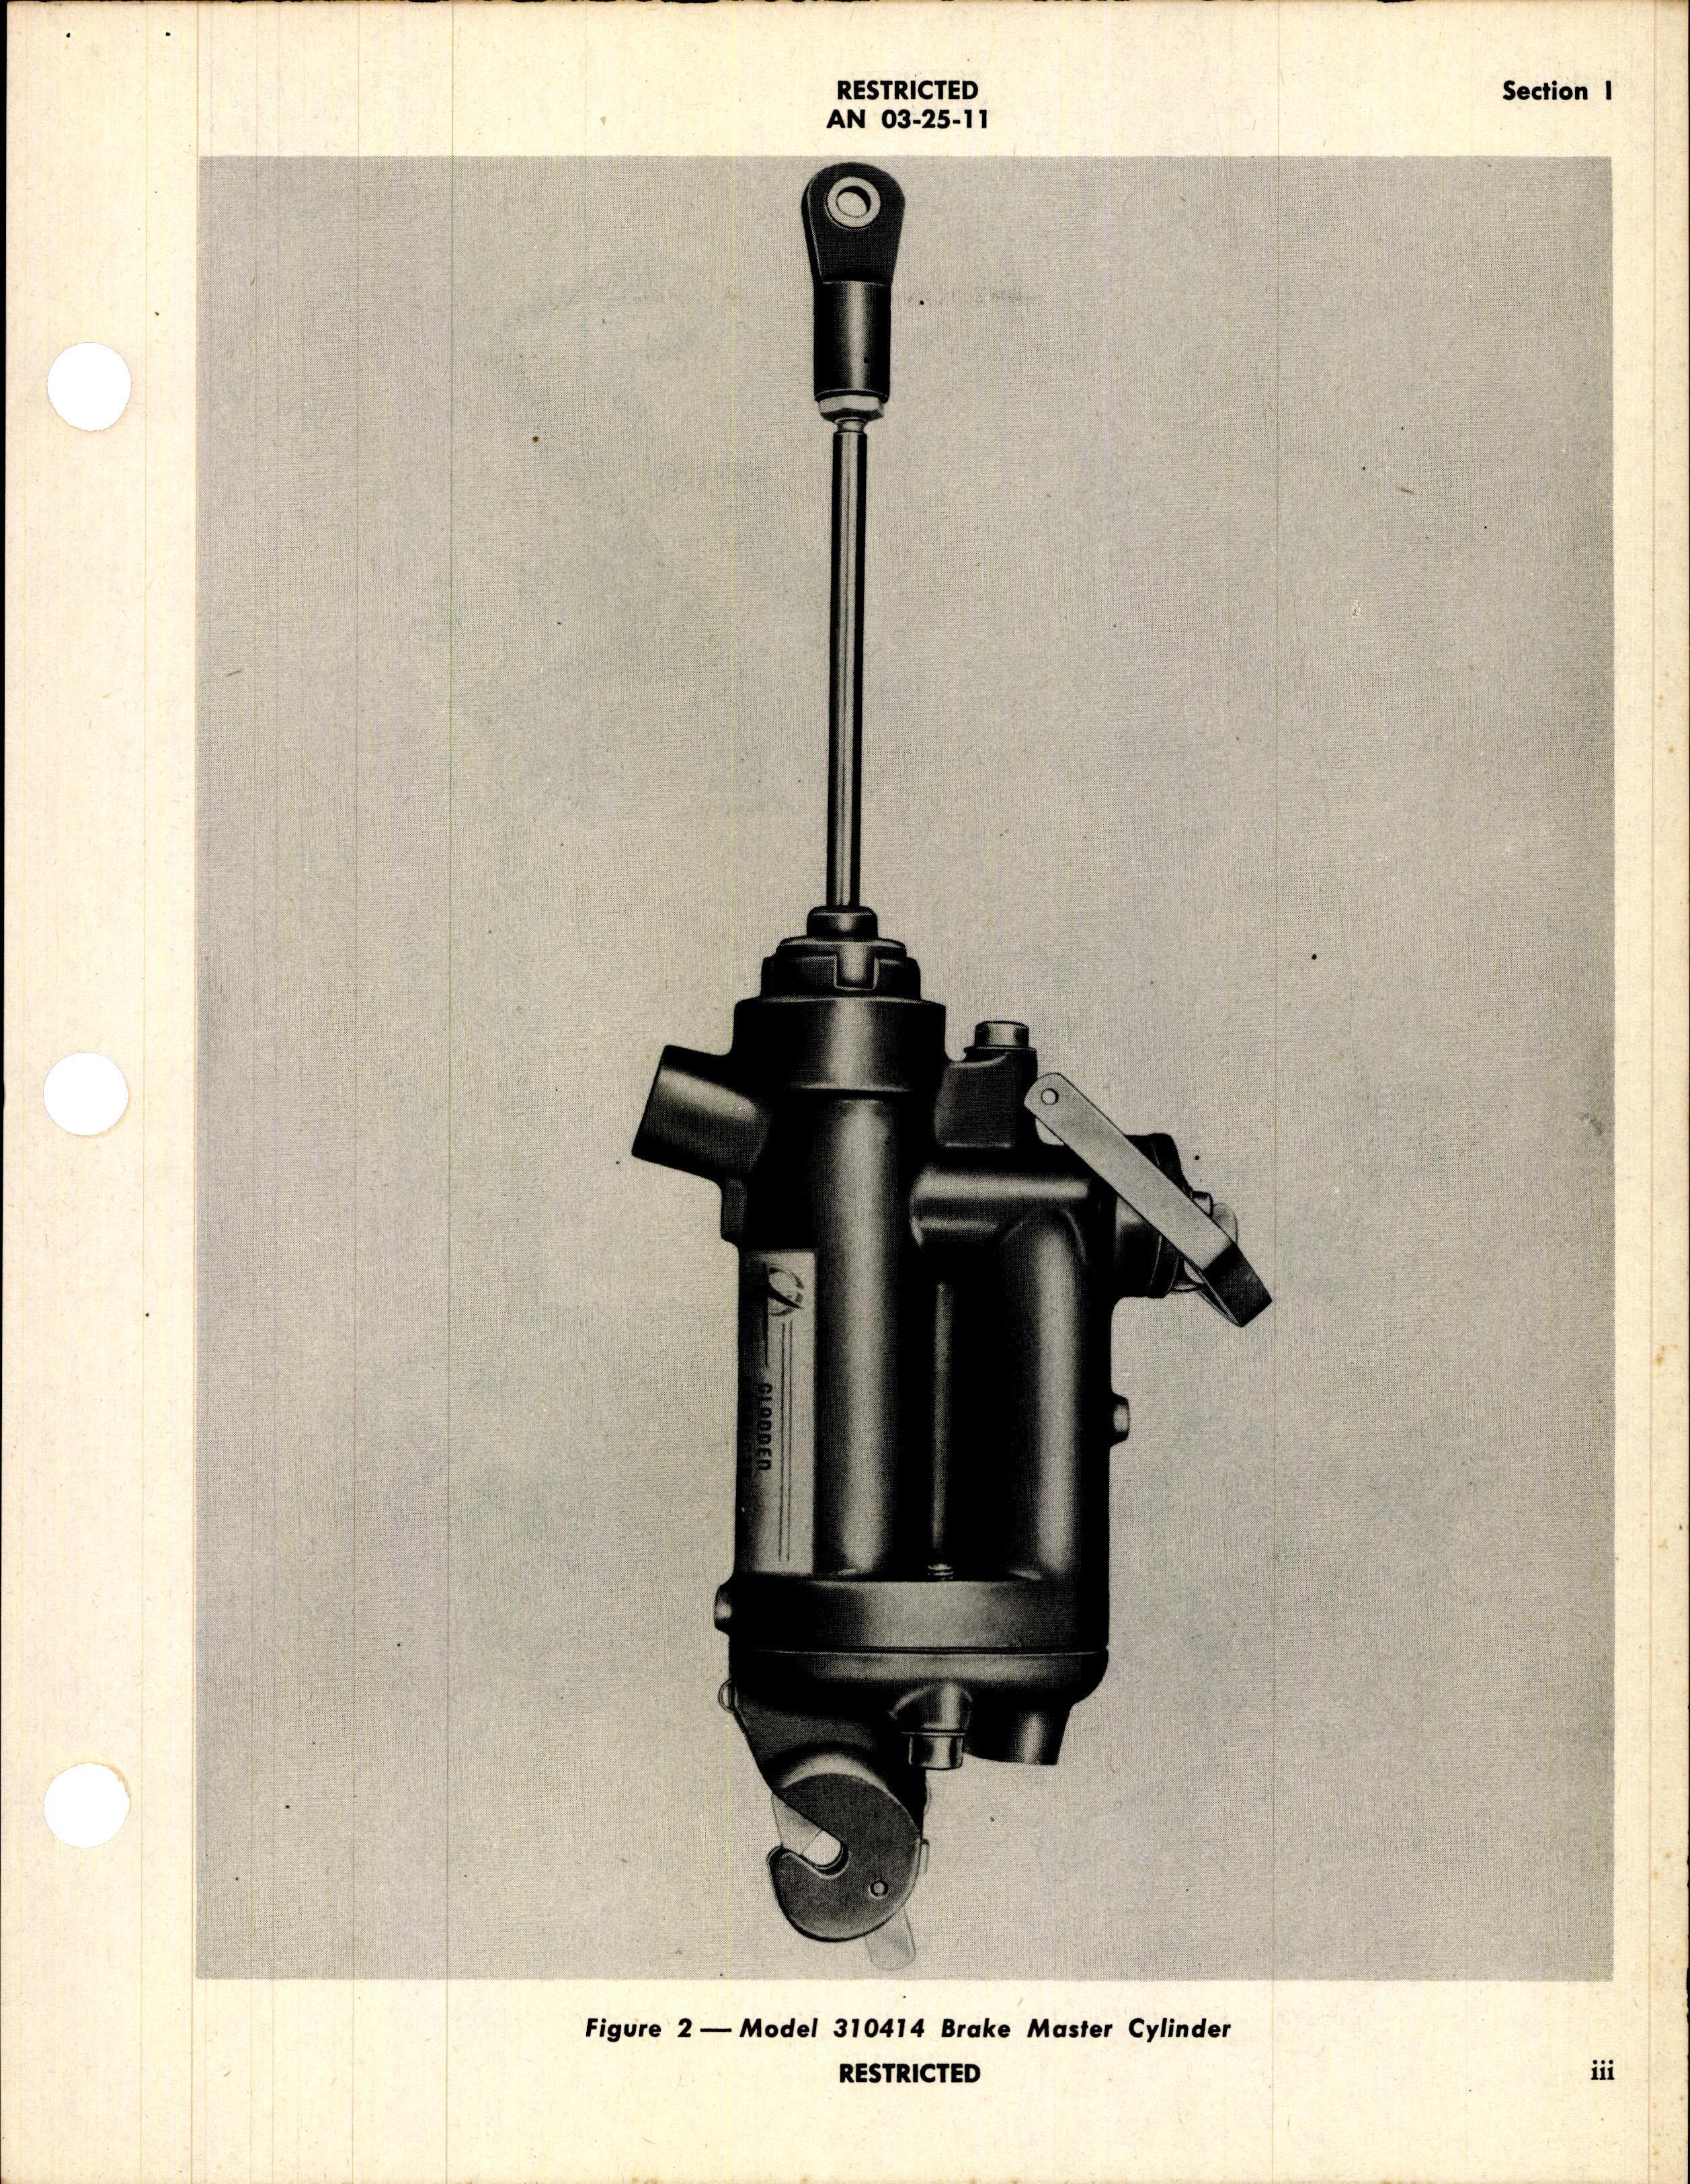 Sample page 5 from AirCorps Library document: Overhaul Instructions with Parts Catalog for Brake Master Cylinders